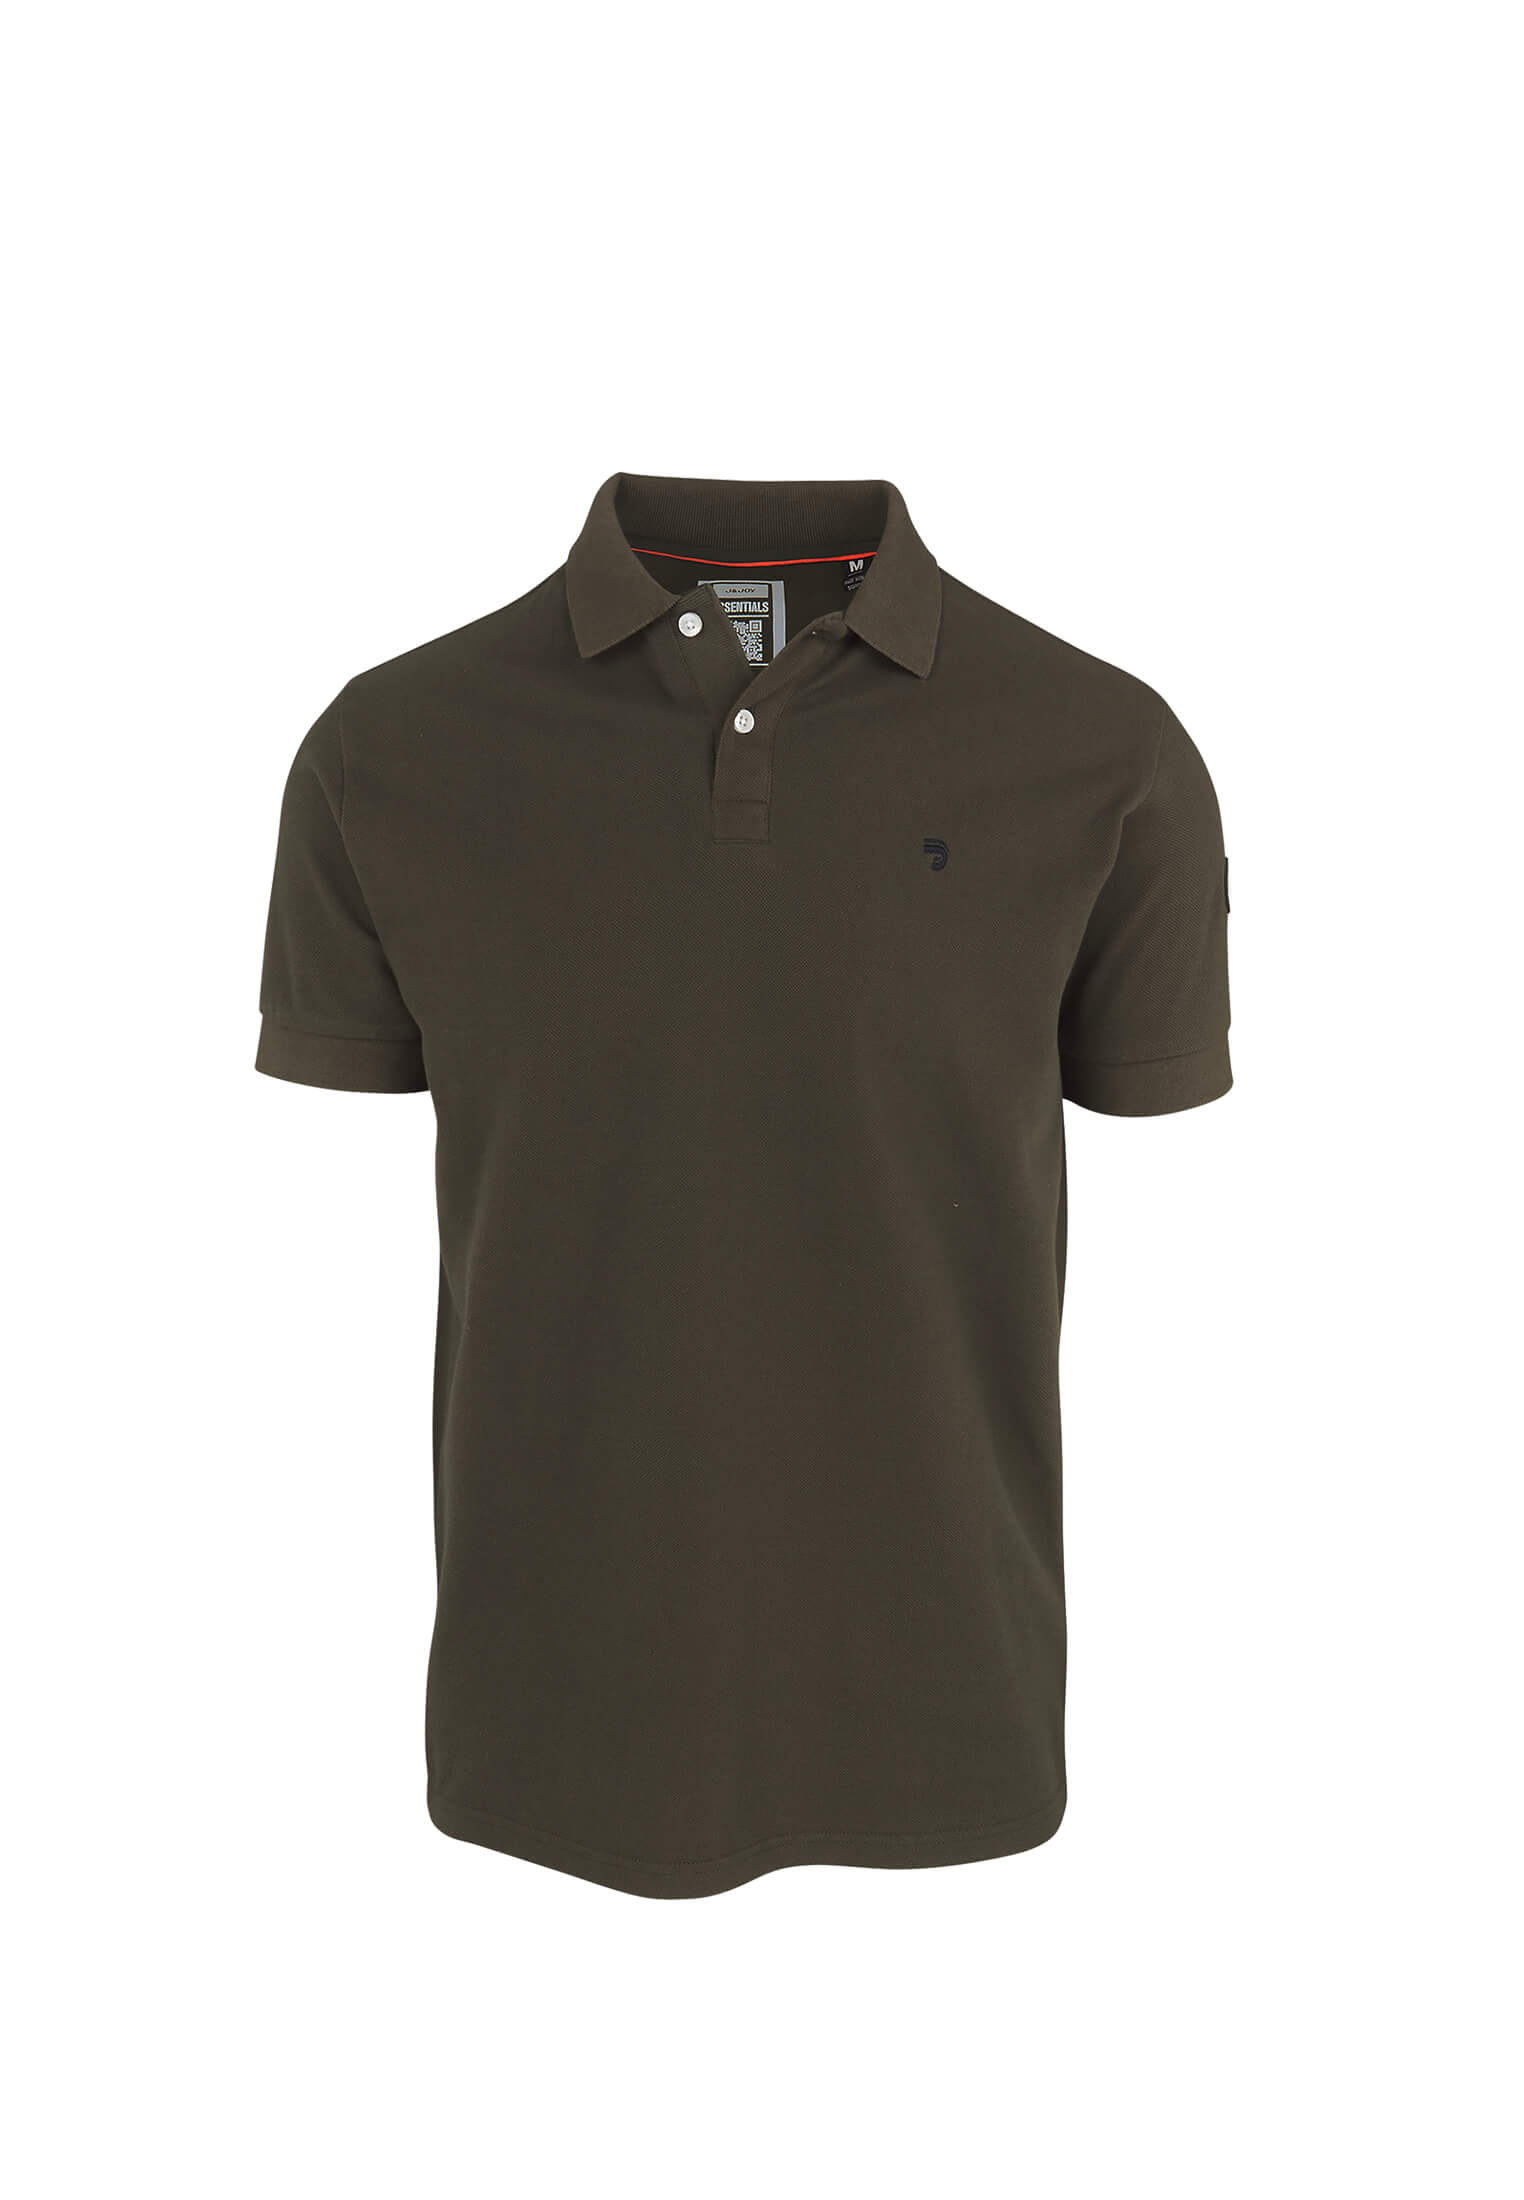 Polo Essentials Homme 20 Green Olive | J&JOY.